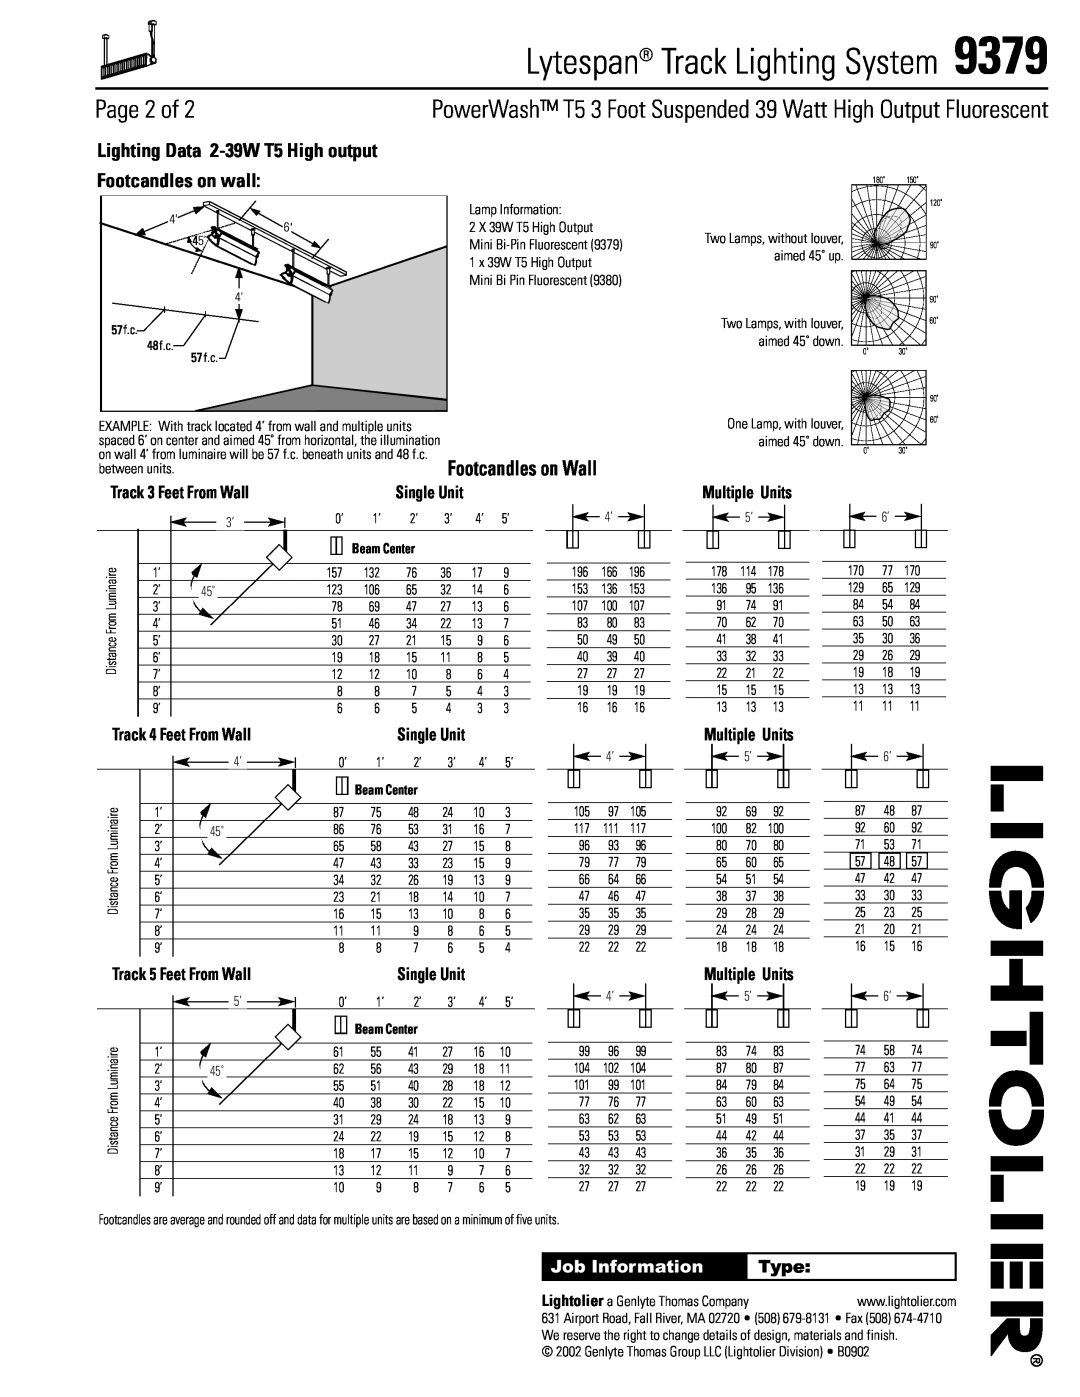 Lightolier 9379 Page 2 of, Lighting Data 2-39WT5 High output, Footcandles on wall, Lytespan Track Lighting System, Type 